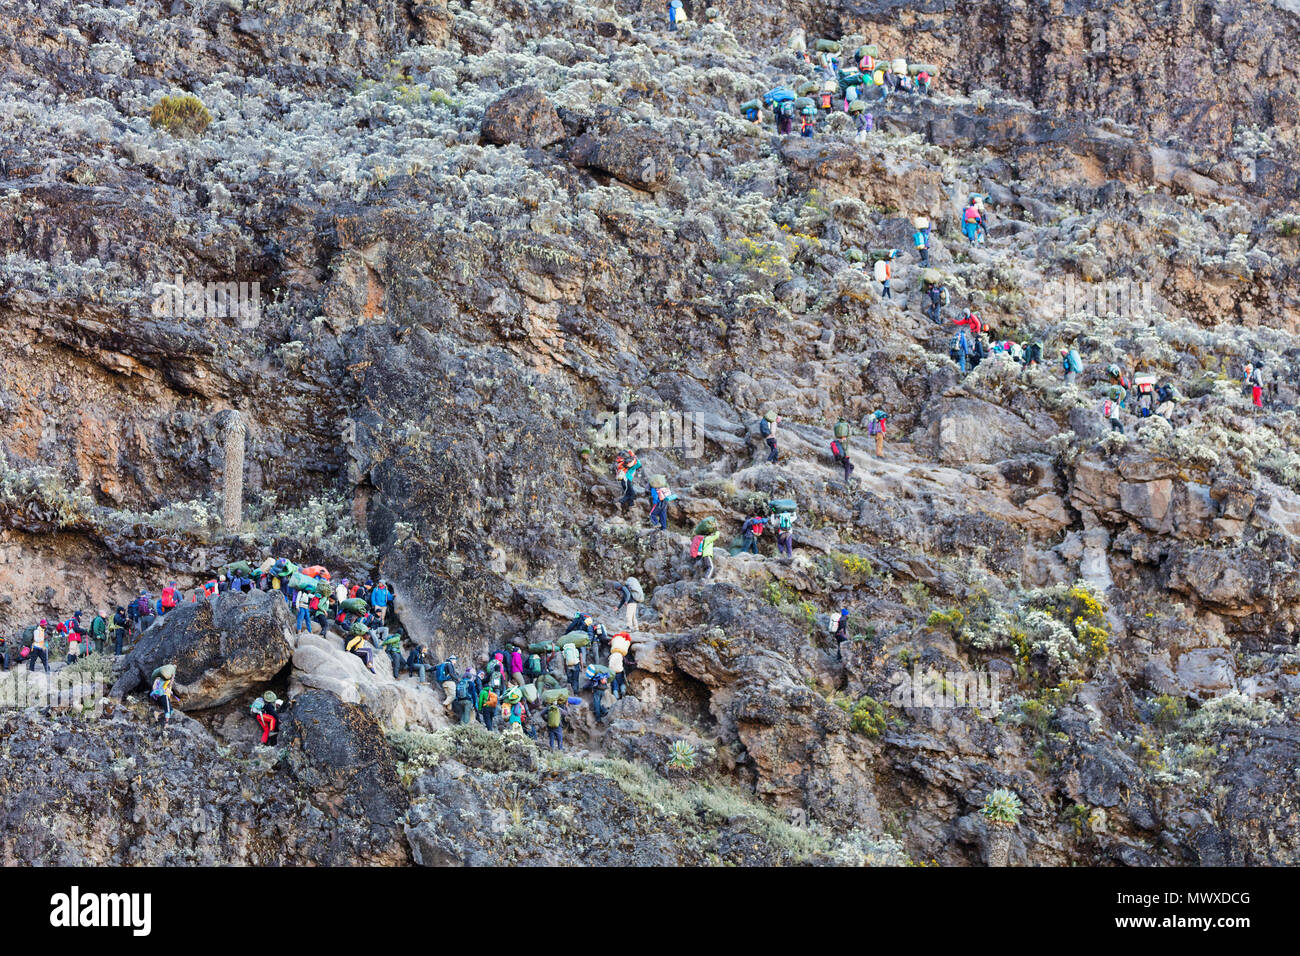 Hikers and porters on Barranco Wall, Kilimanjaro National Park, UNESCO World Heritage Site, Tanzania, East Africa, Africa Stock Photo